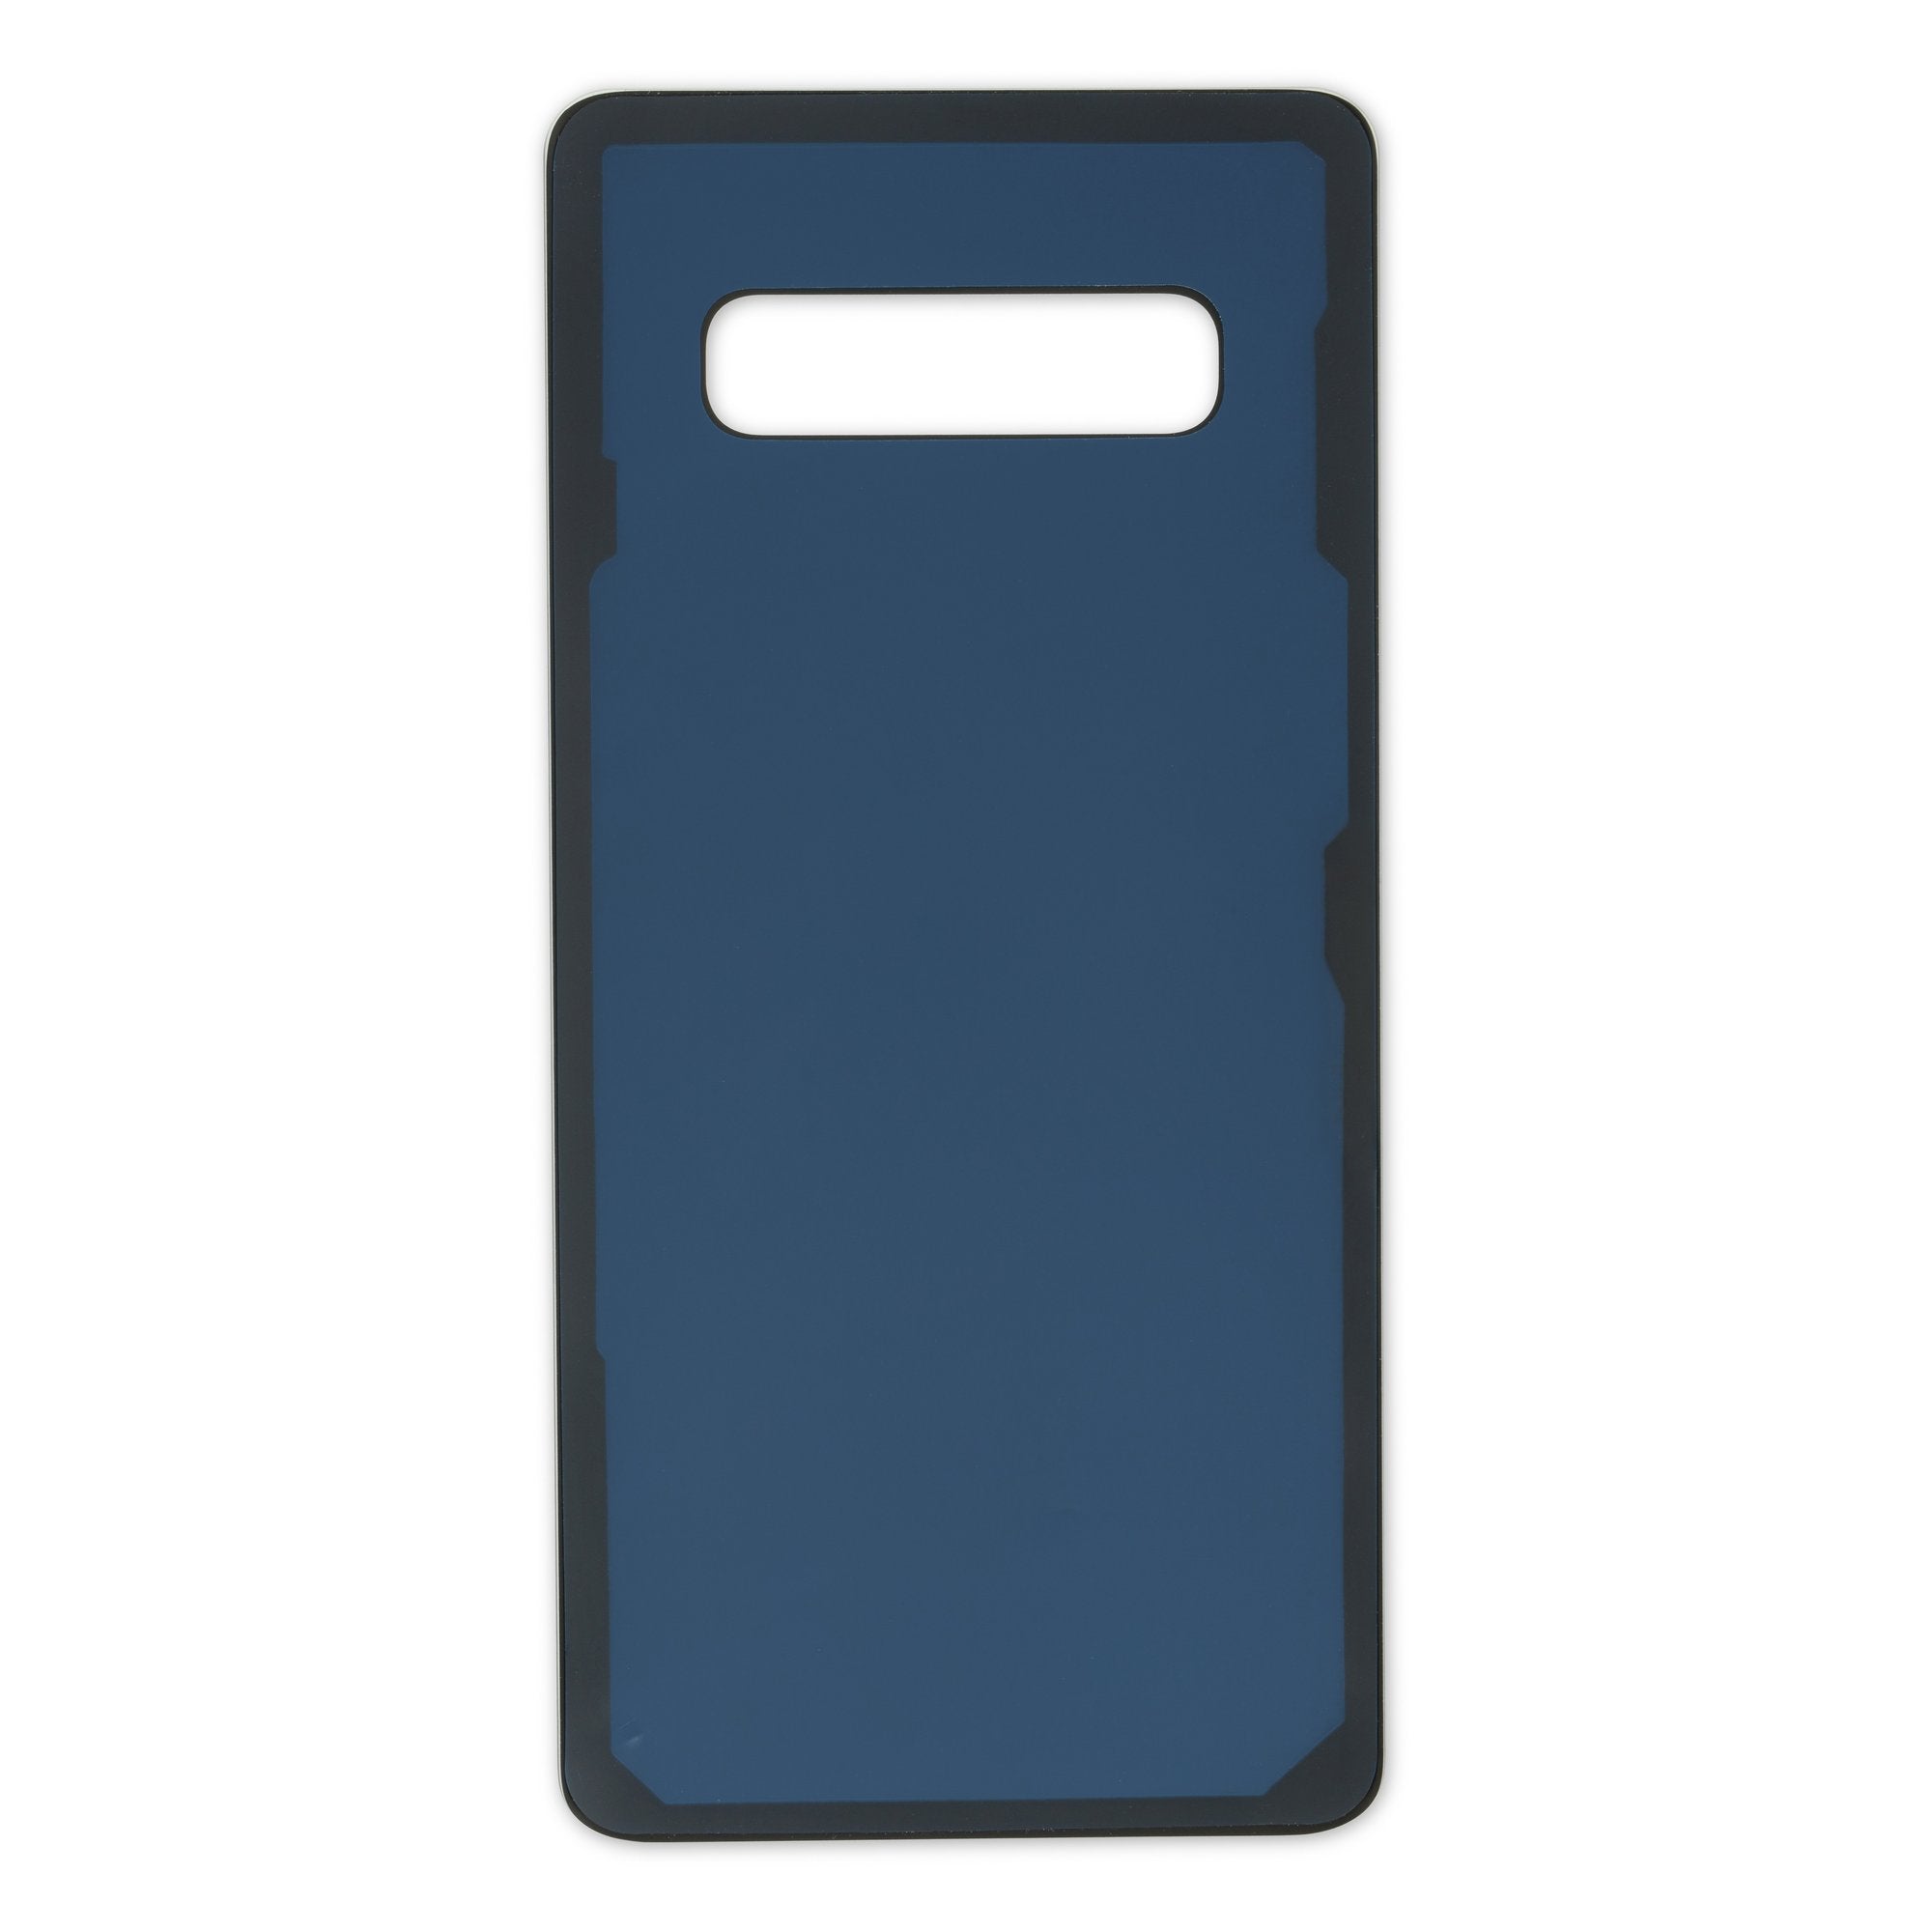 Galaxy S10+ Rear Glass Panel/Cover Blue New